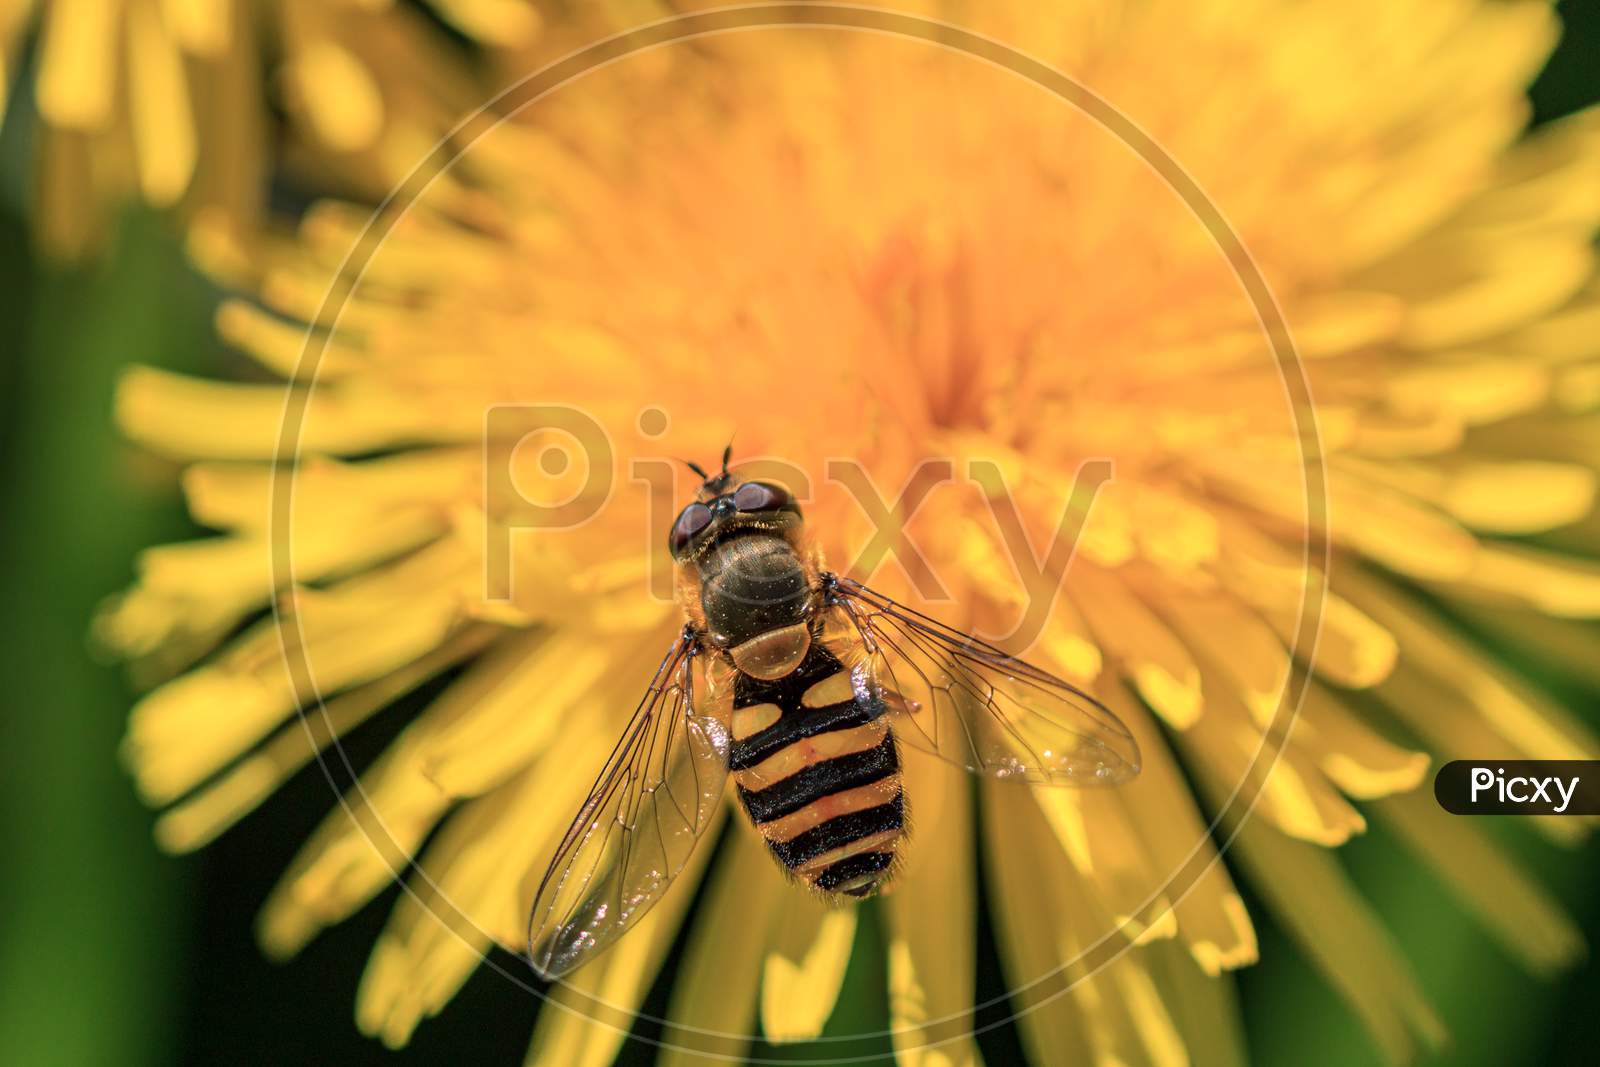 Black And Yellow Wasp In Yellow Dandelion